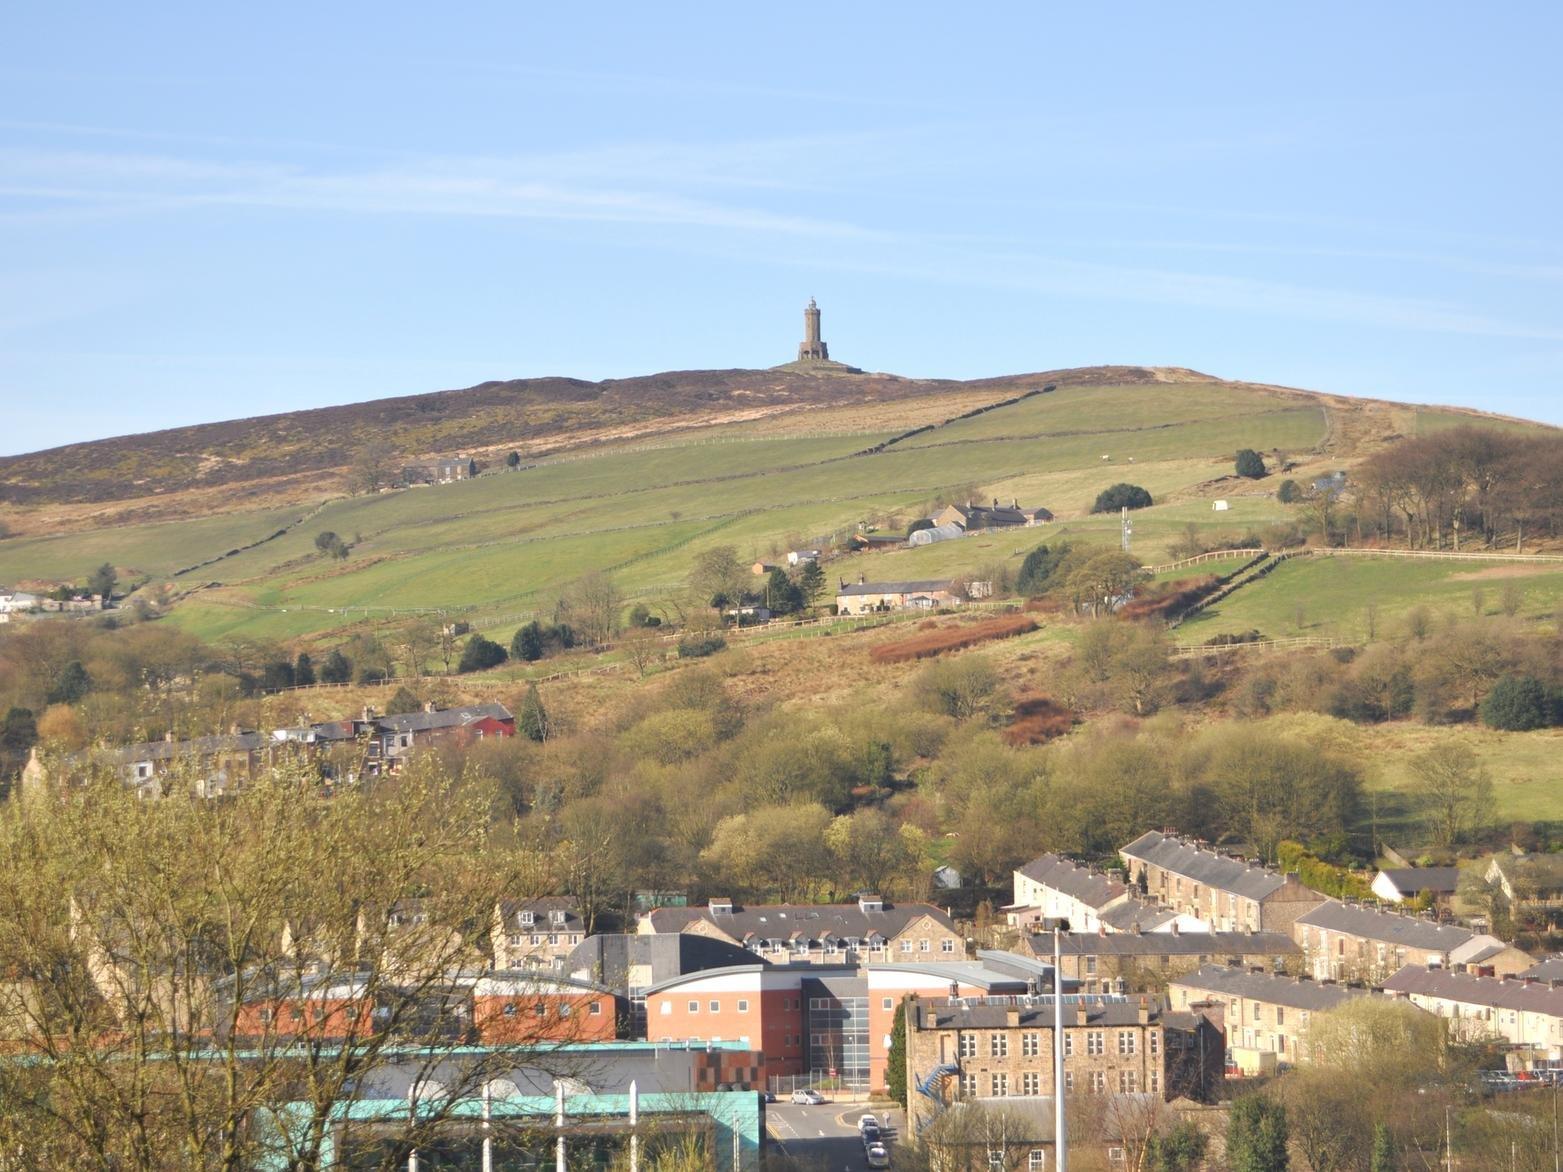 A West Pennine Moors Trail circular walk takes in some fantastic views of the surrounding countryside from Darwen Moors. Darwen Tower was built to celebrate Queen Victorias Diamond Jubilee in 1897.